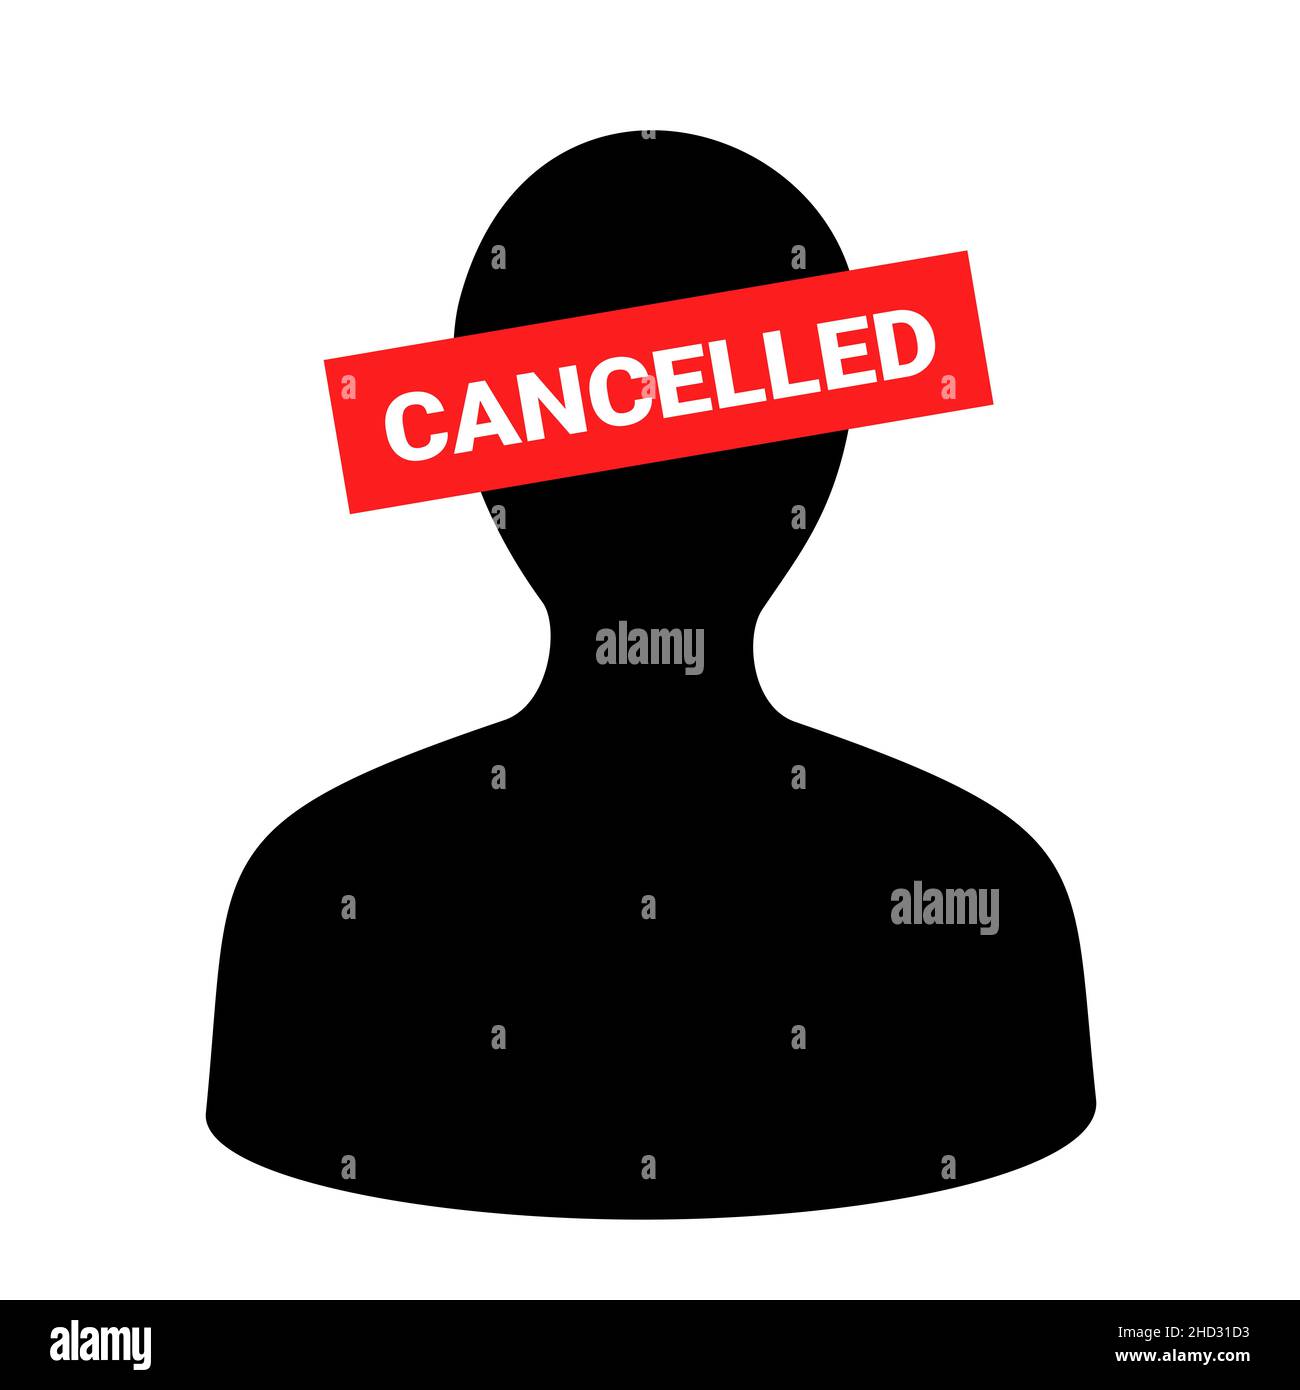 Cancel culture - person, man, human and characted is cancelled, erased, removed, eliminated and excommunicated. Personal cancellation, removal, elimin Stock Photo